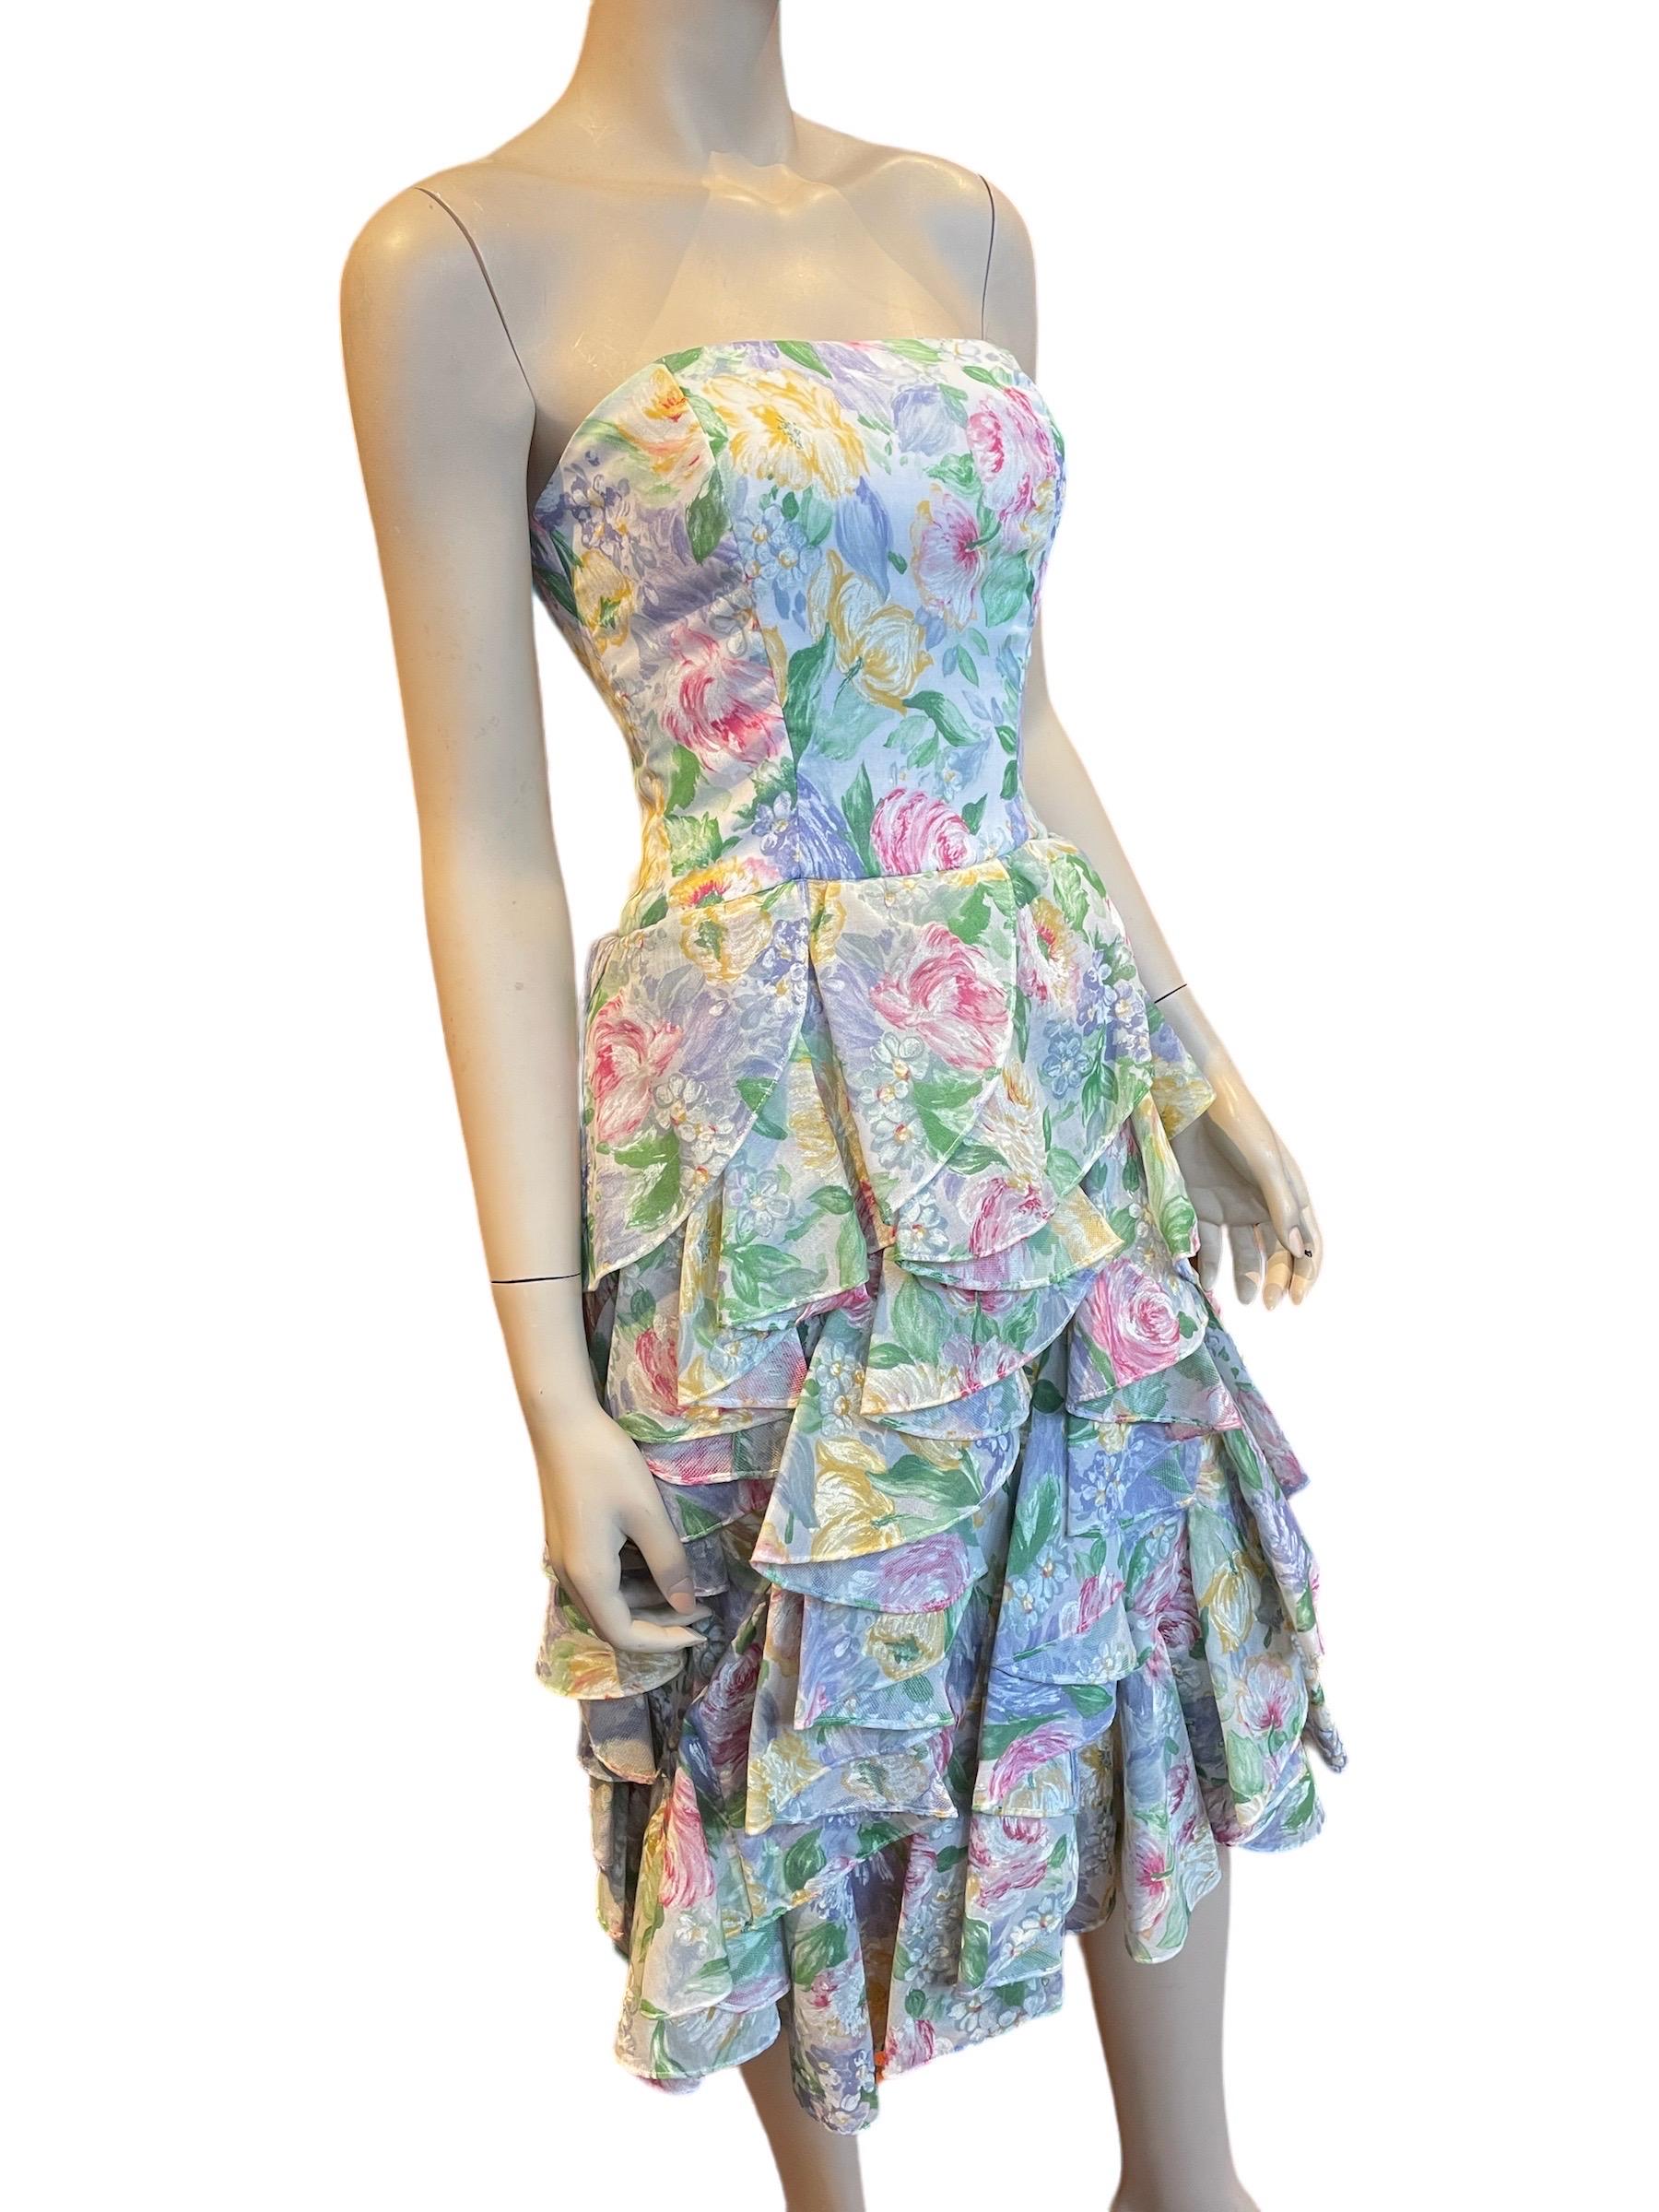 Women's or Men's 1980s Victor Costa Watercolor Floral Strapless Dress with Ruffled Skirt  For Sale